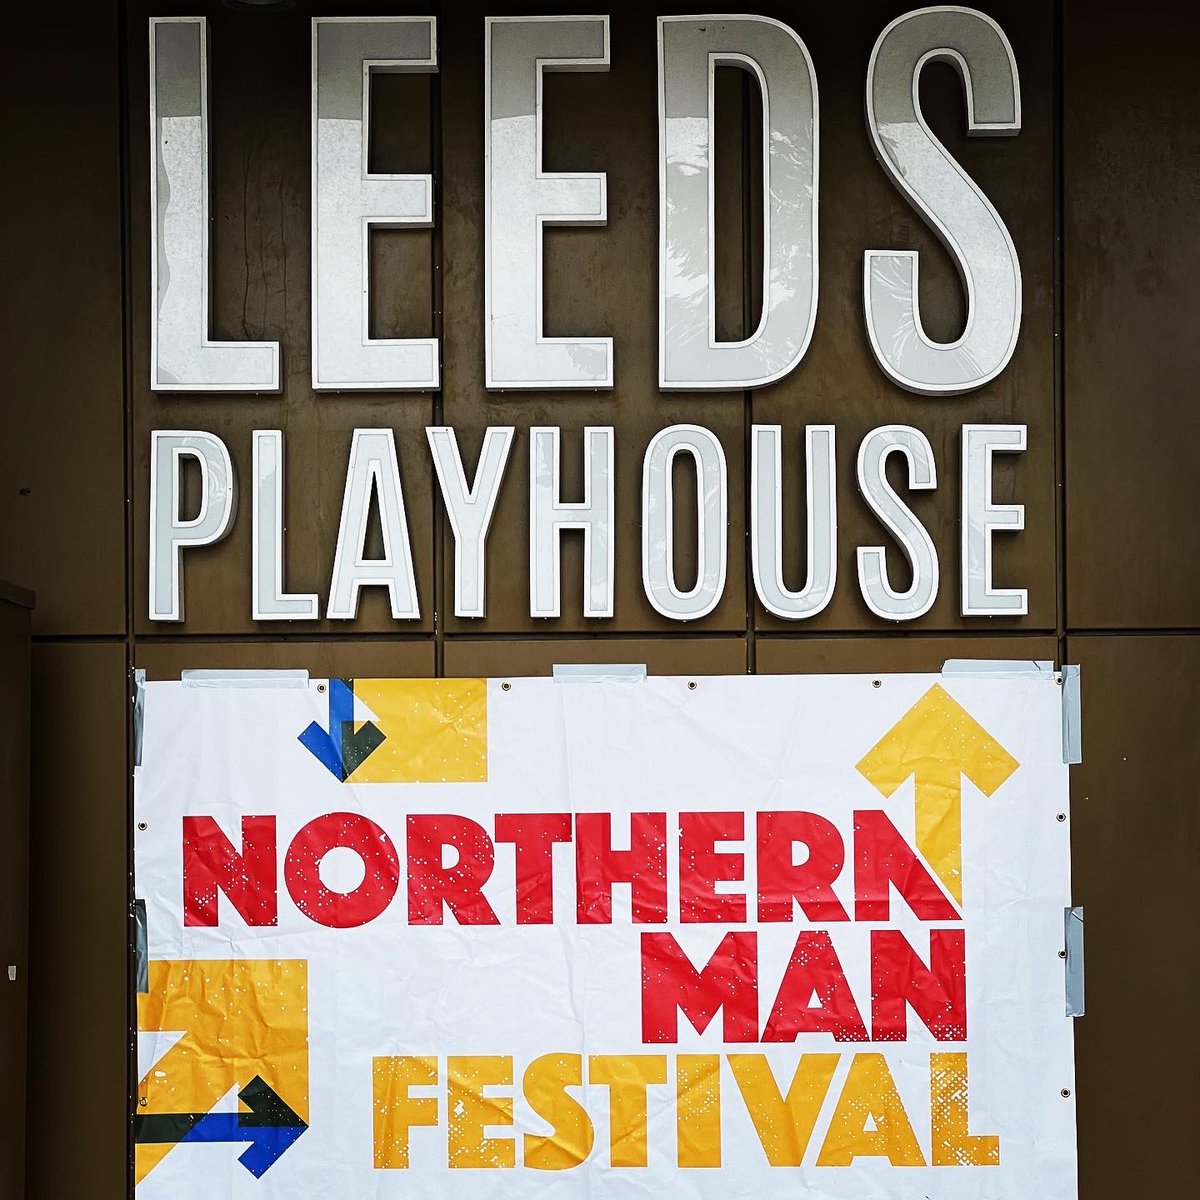 Thanks so much to @space2leeds @leedsplayhouse #northernmanfestival the audience who came to our screening of #BlackBoyJoyGone it was received so well and we were happy to a part of the festival. #shoutout to everyone involved and my partner in this project @ourognaoisaac